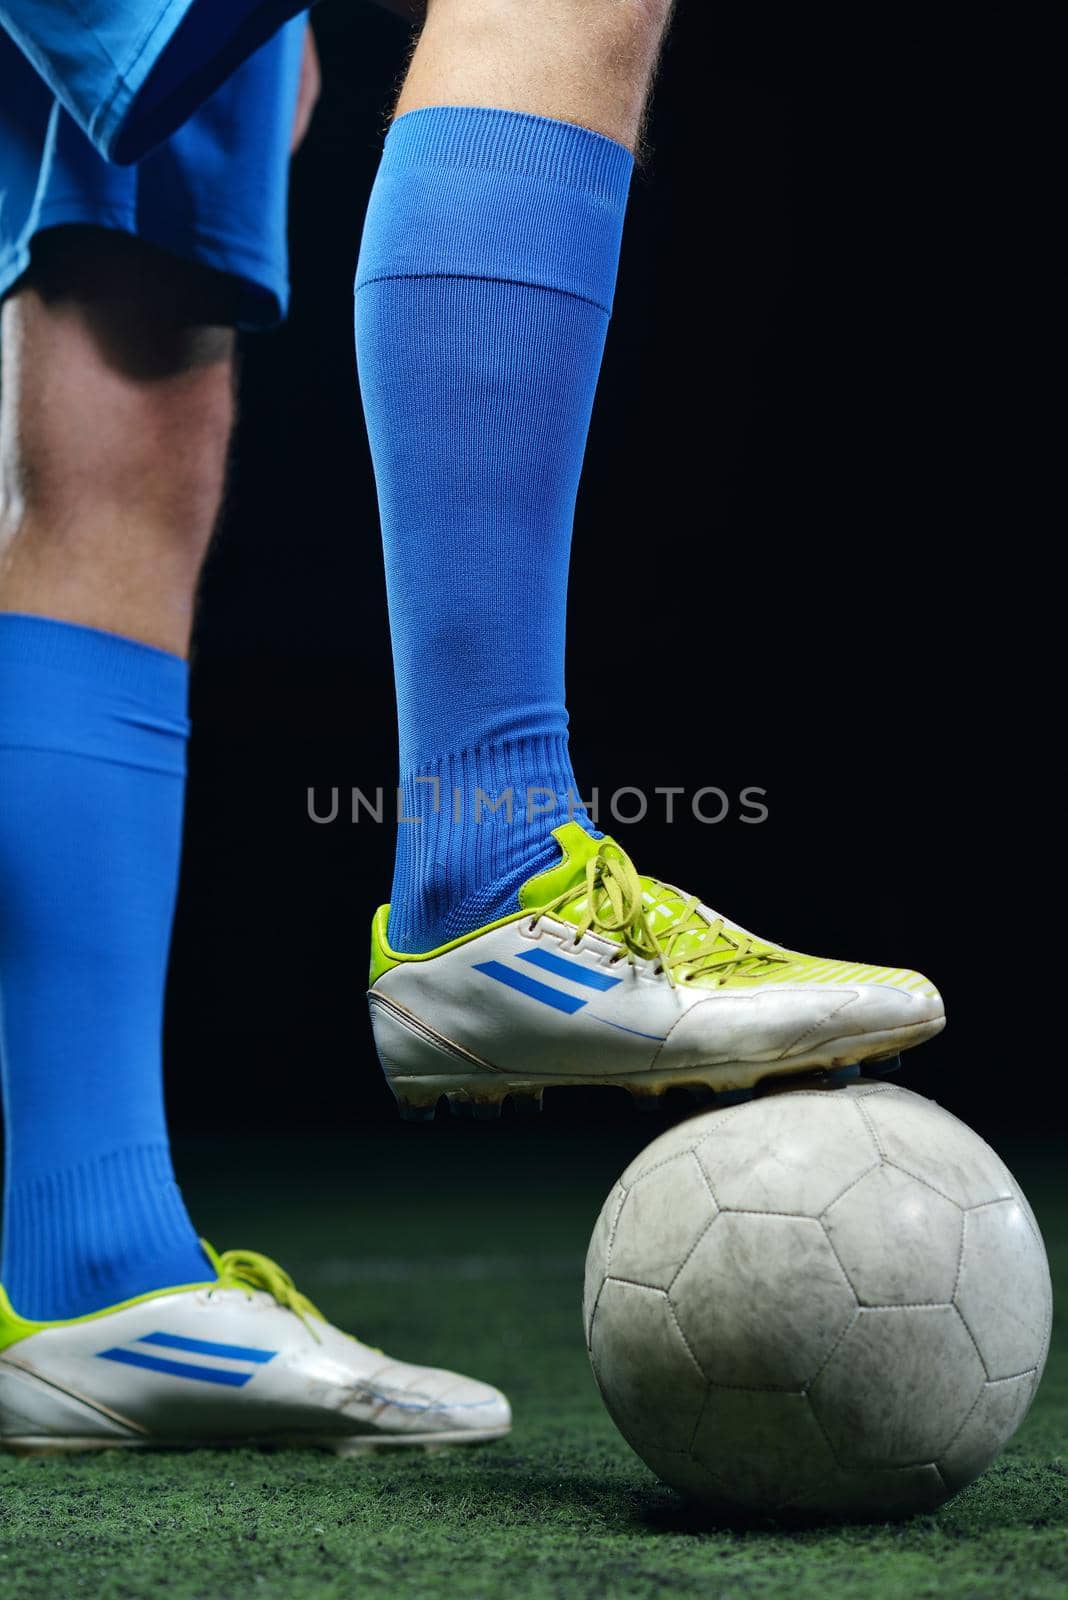 soccer player doing kick with ball on football stadium  field  isolated on black background